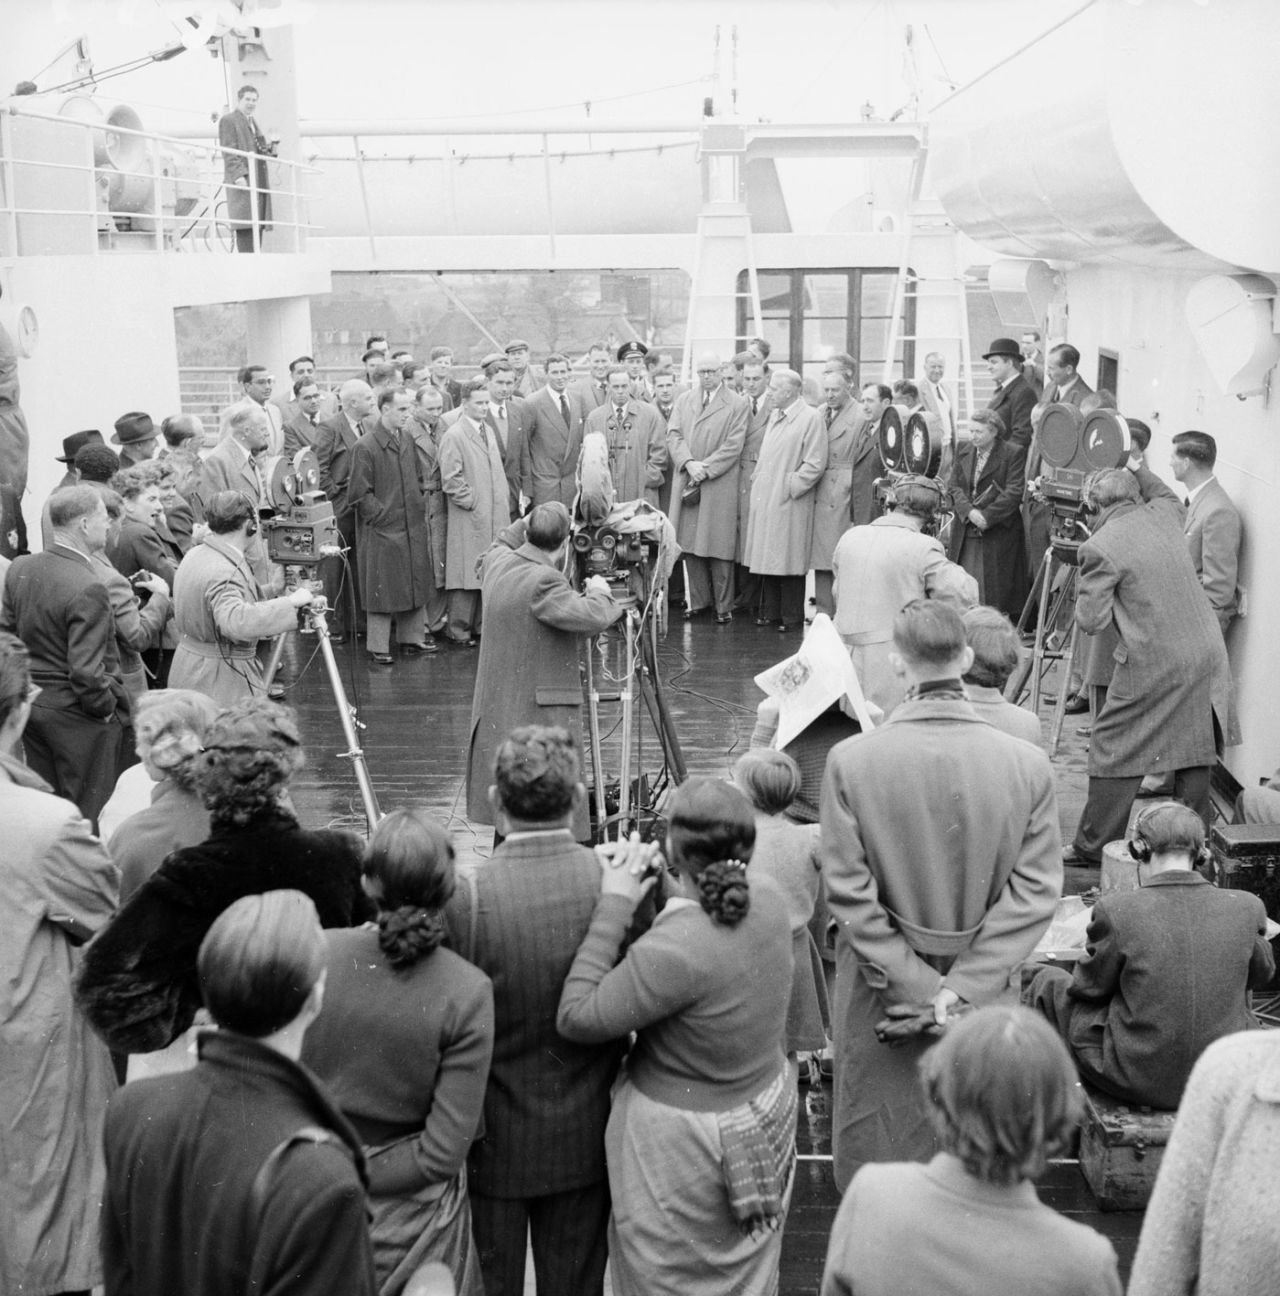 Australian captain Ian Johnson and his team are welcomed on their arrival in Tilbury, April 25, 1956